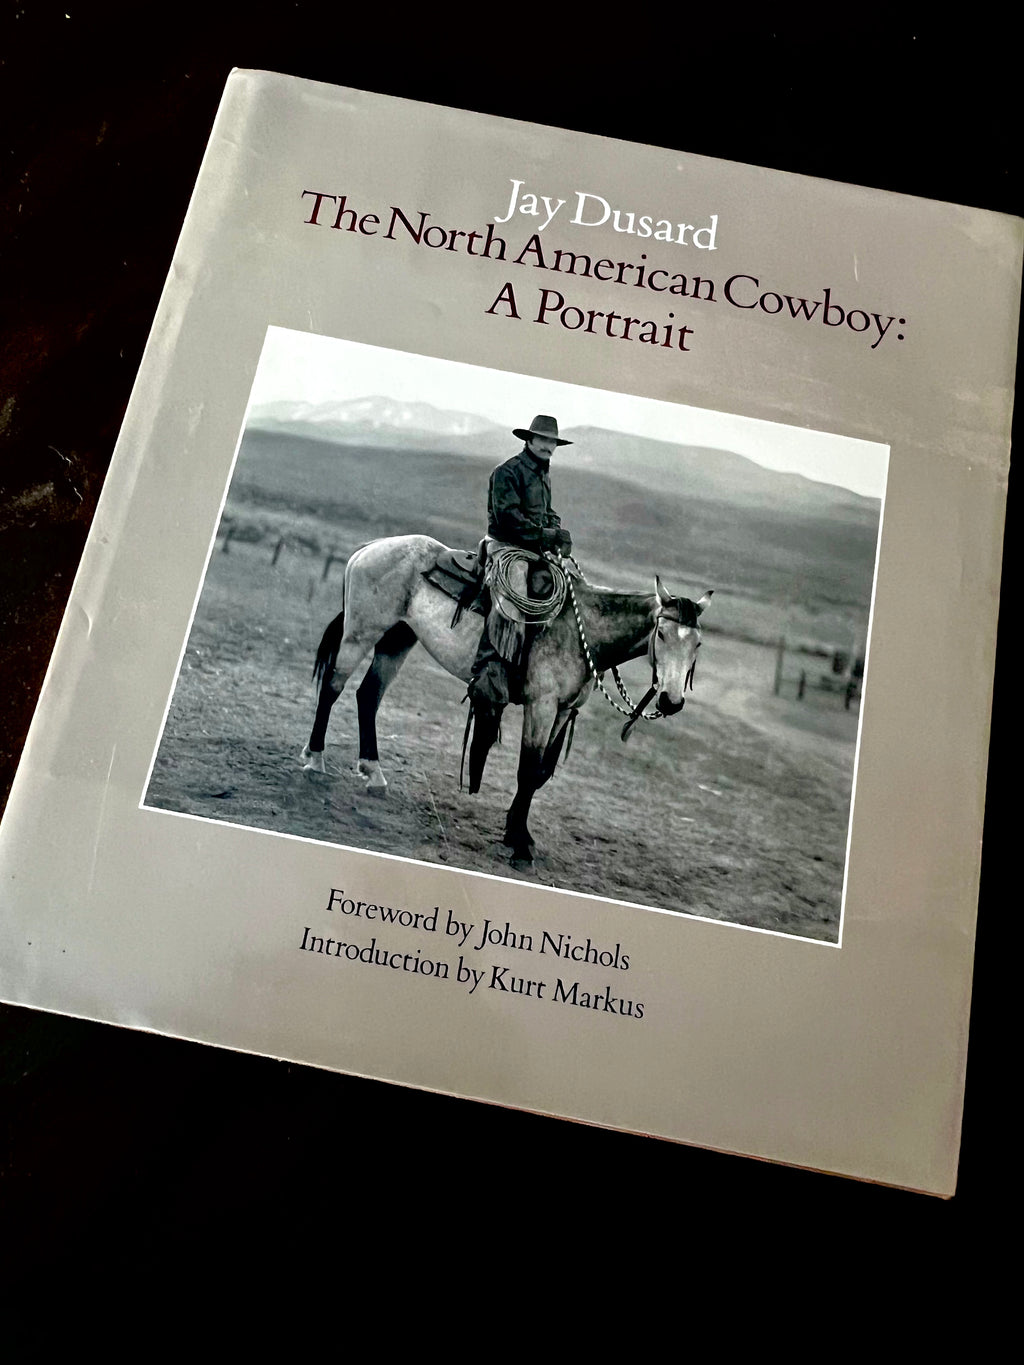 Jay Dusard “The North American Cowboy: A Portrait” Collector Book